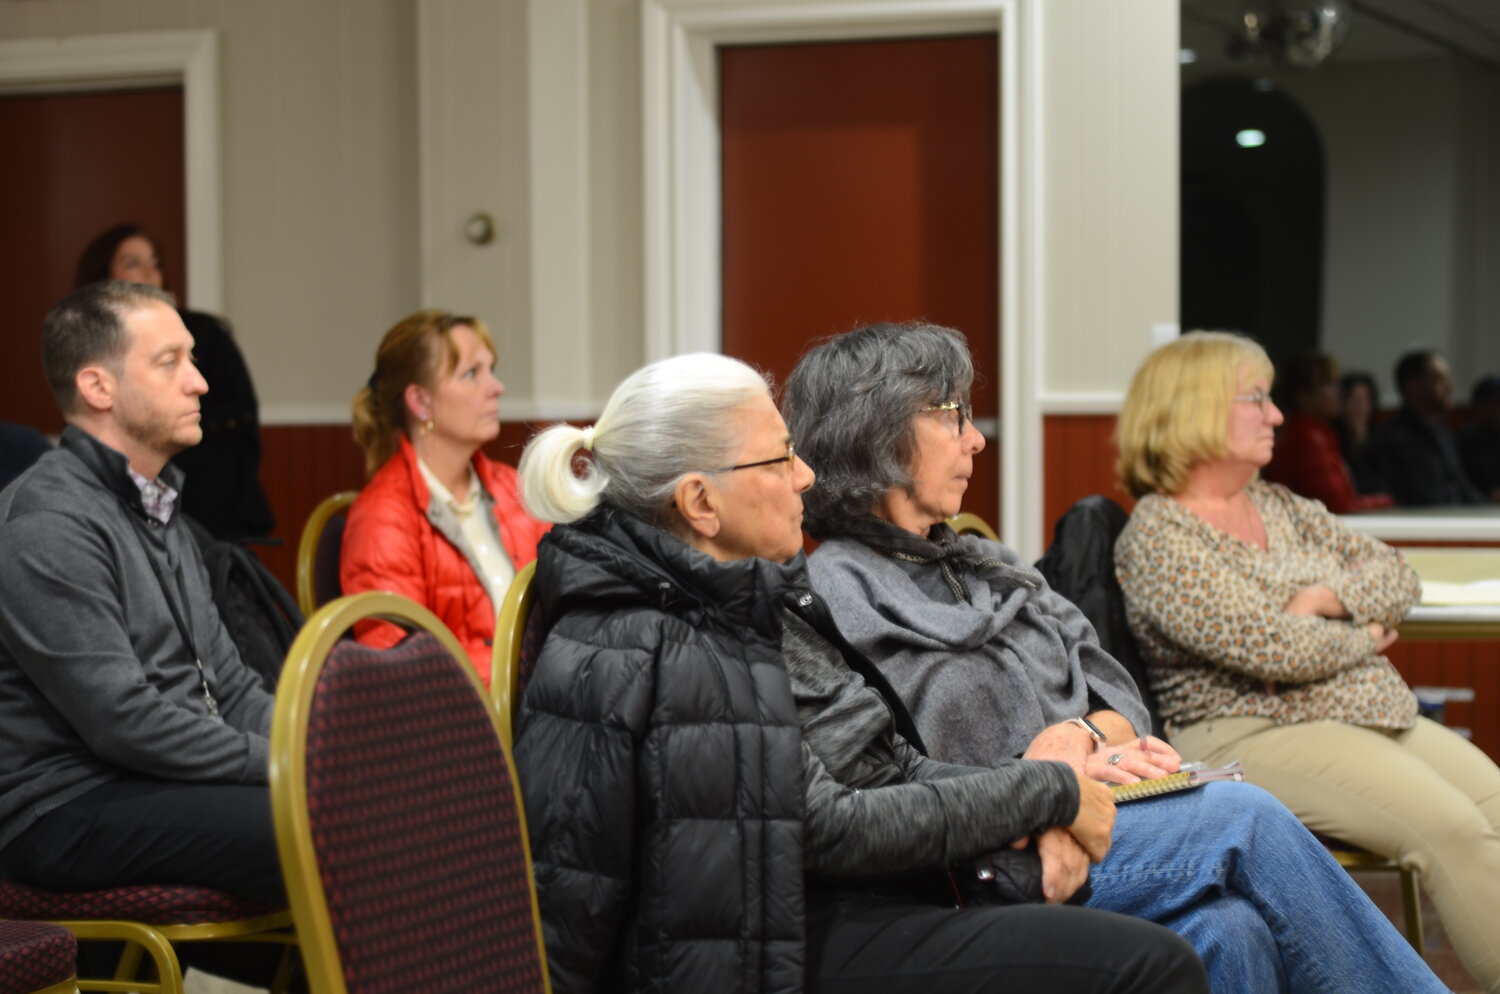 South Shore residents who are Liberty Utilities customers gathered in Valley Stream to voice questions and concerns about a proposed 34 percent rate hike.